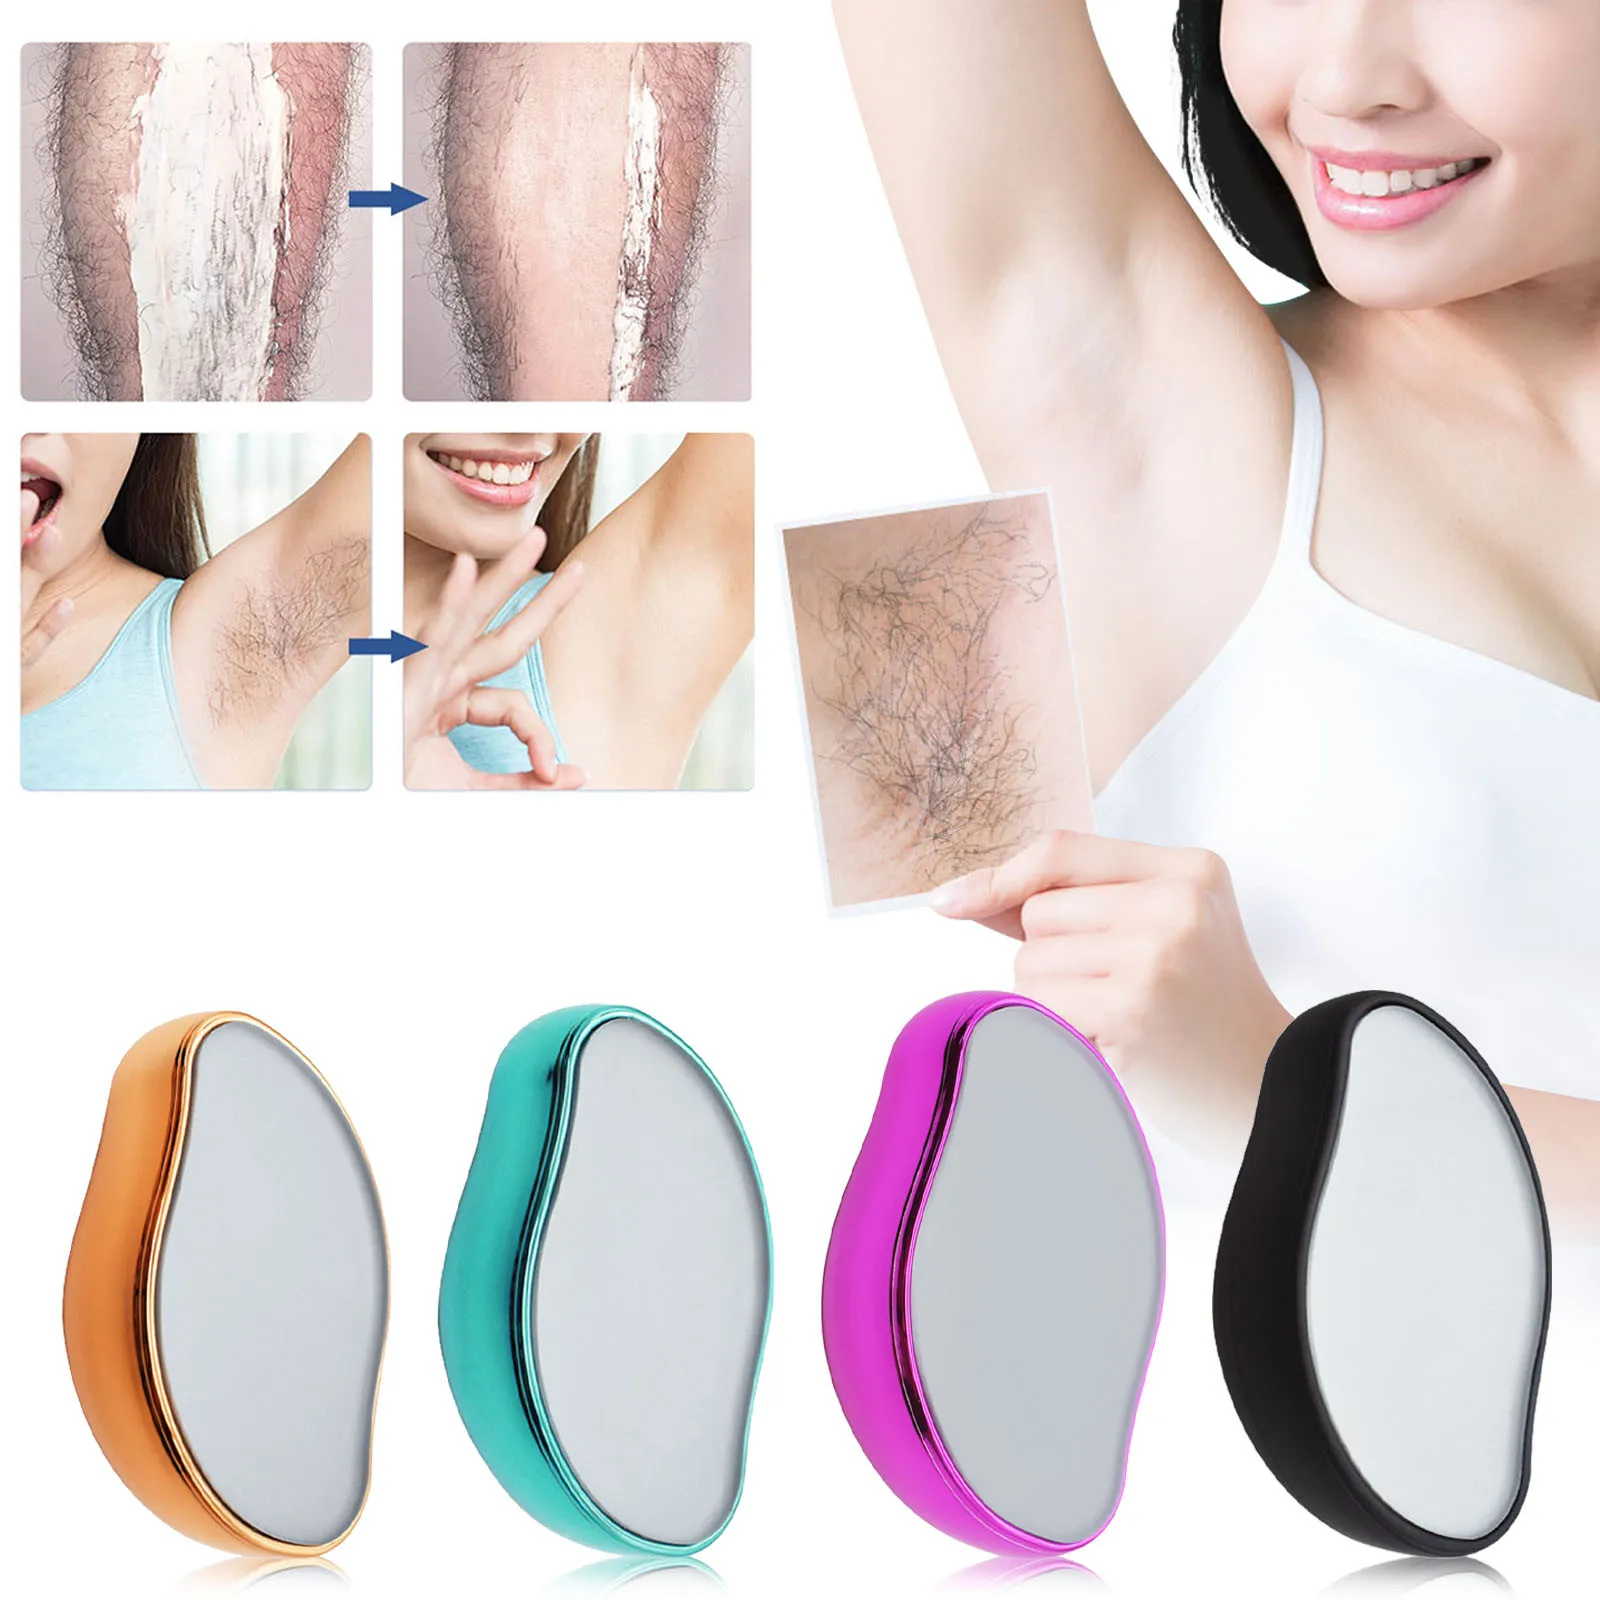 

Gentle Hair Removal Exfoliante Face Body Care Professional Safe Painless Physical Epilator Home Glass Massage Cosmetology Tool